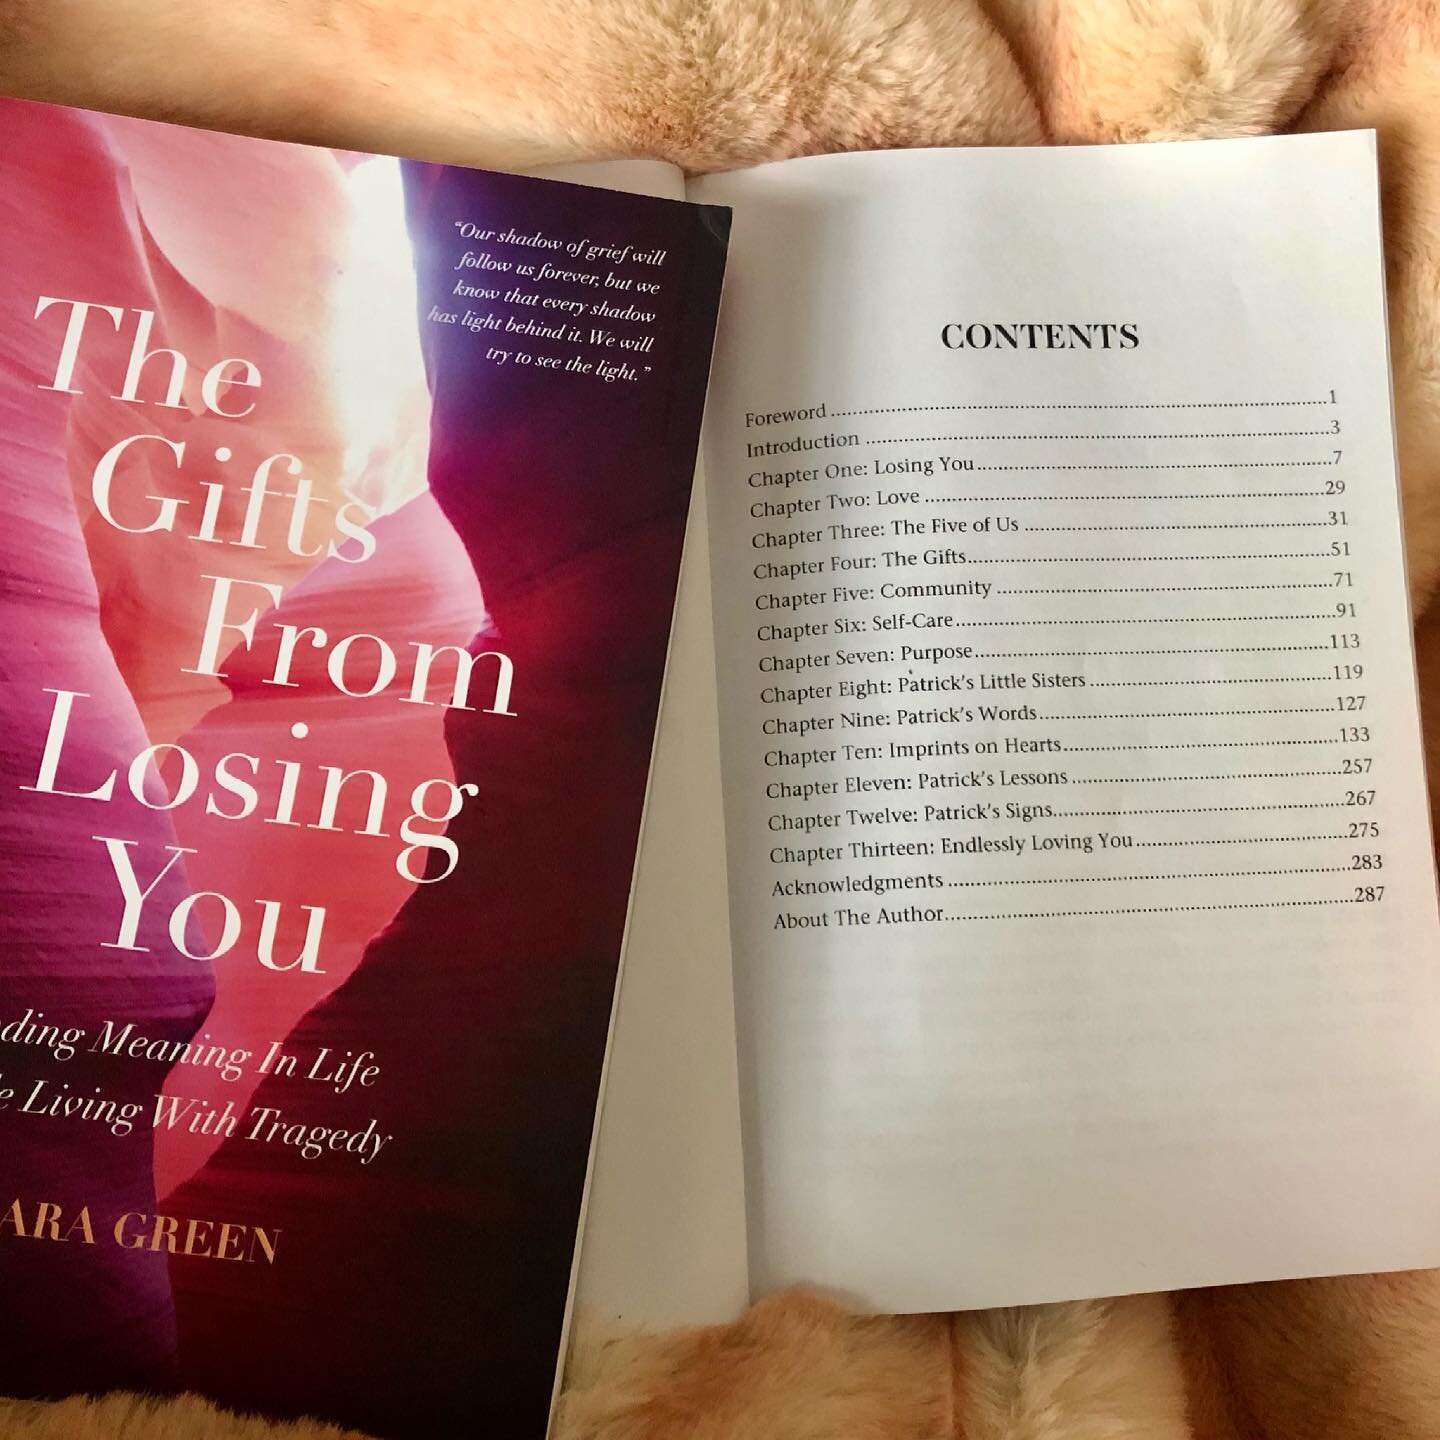 Here&rsquo;s the chapter list. For those who have read my book, which chapter/chapters spoke to your heart the most? Share below. 💜 Link to purchase in Bio. #thegiftsfromlosingyou #memoir #selfhelpbook #talkaboutgrief #loveandloss #selfcare #finding